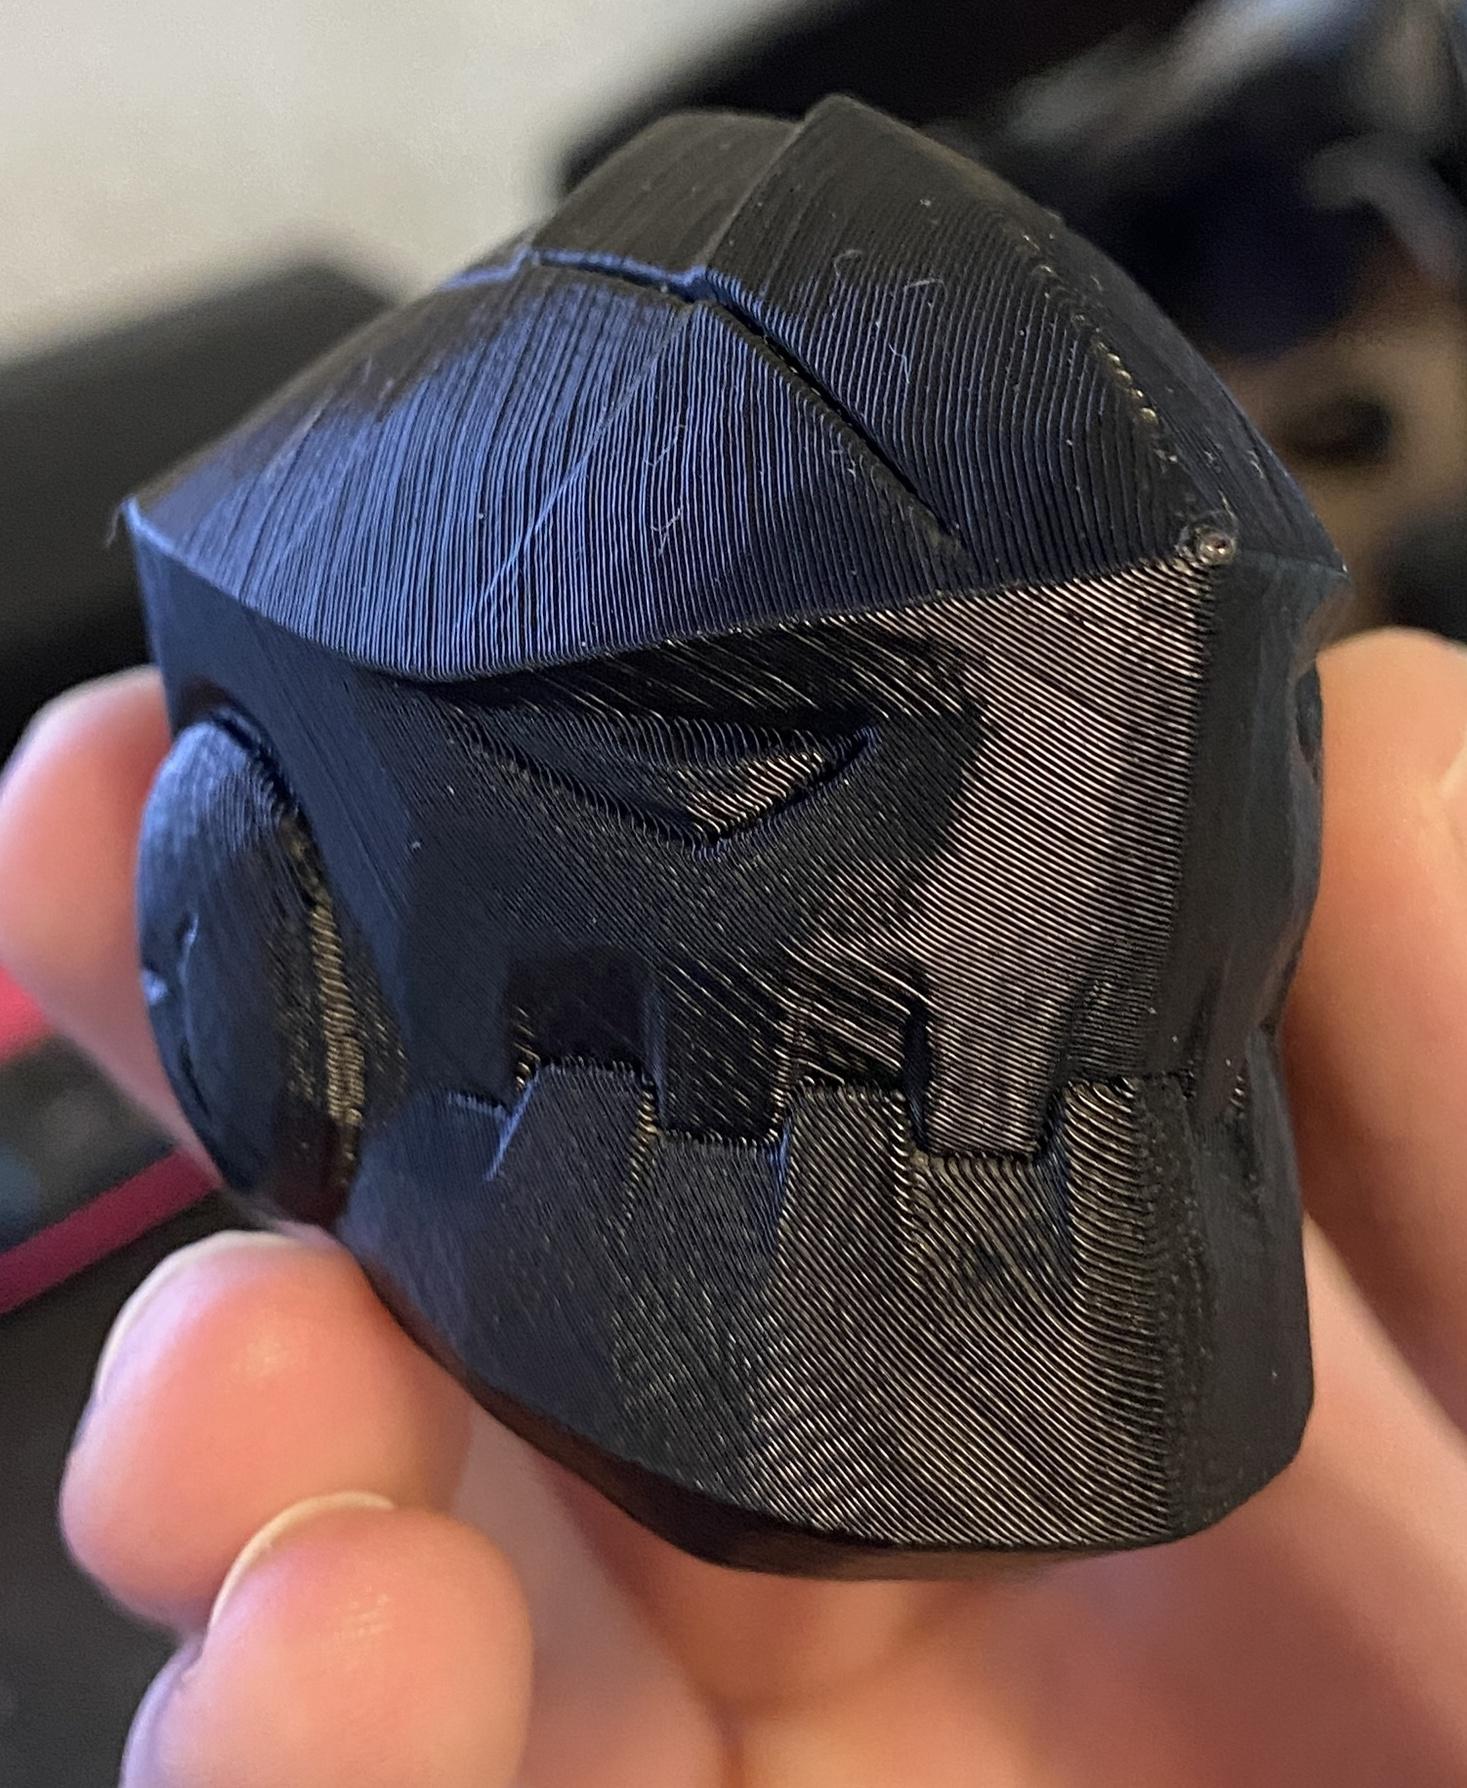 Leviathan Helmet - VS - Planetside 2 - Turned out decent. Though the model has some noise that I tried to avoid, none of that comes through in the print, at least in this size. I will definitely print a bigger one to find out =D - 3d model